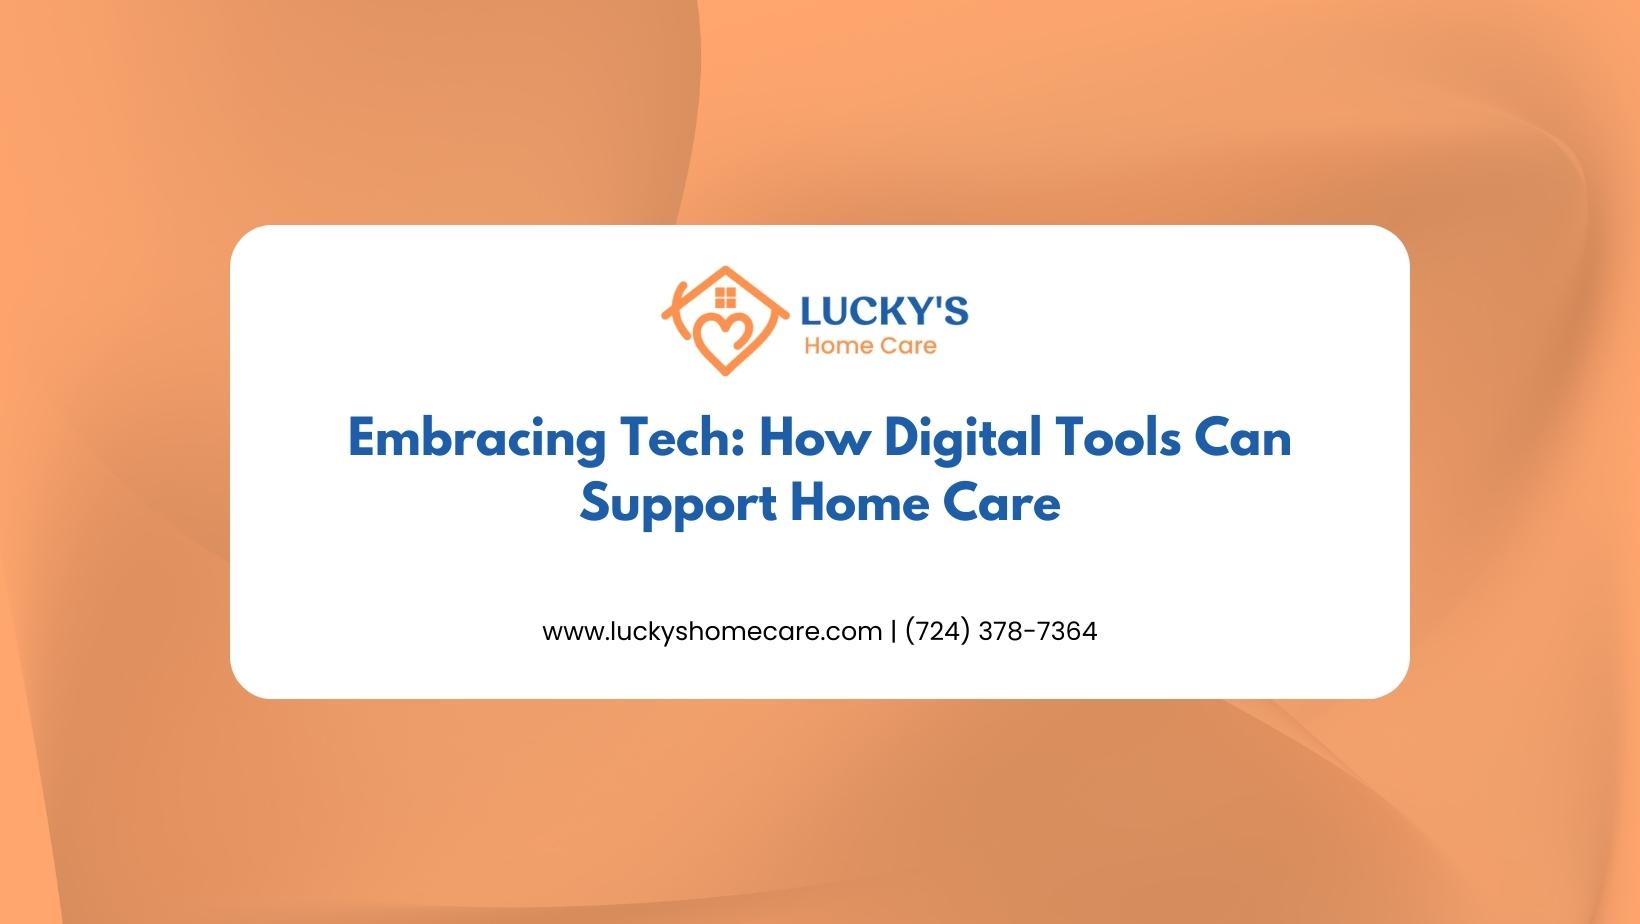 Embracing Tech- How Digital Tools Can Support Home Care